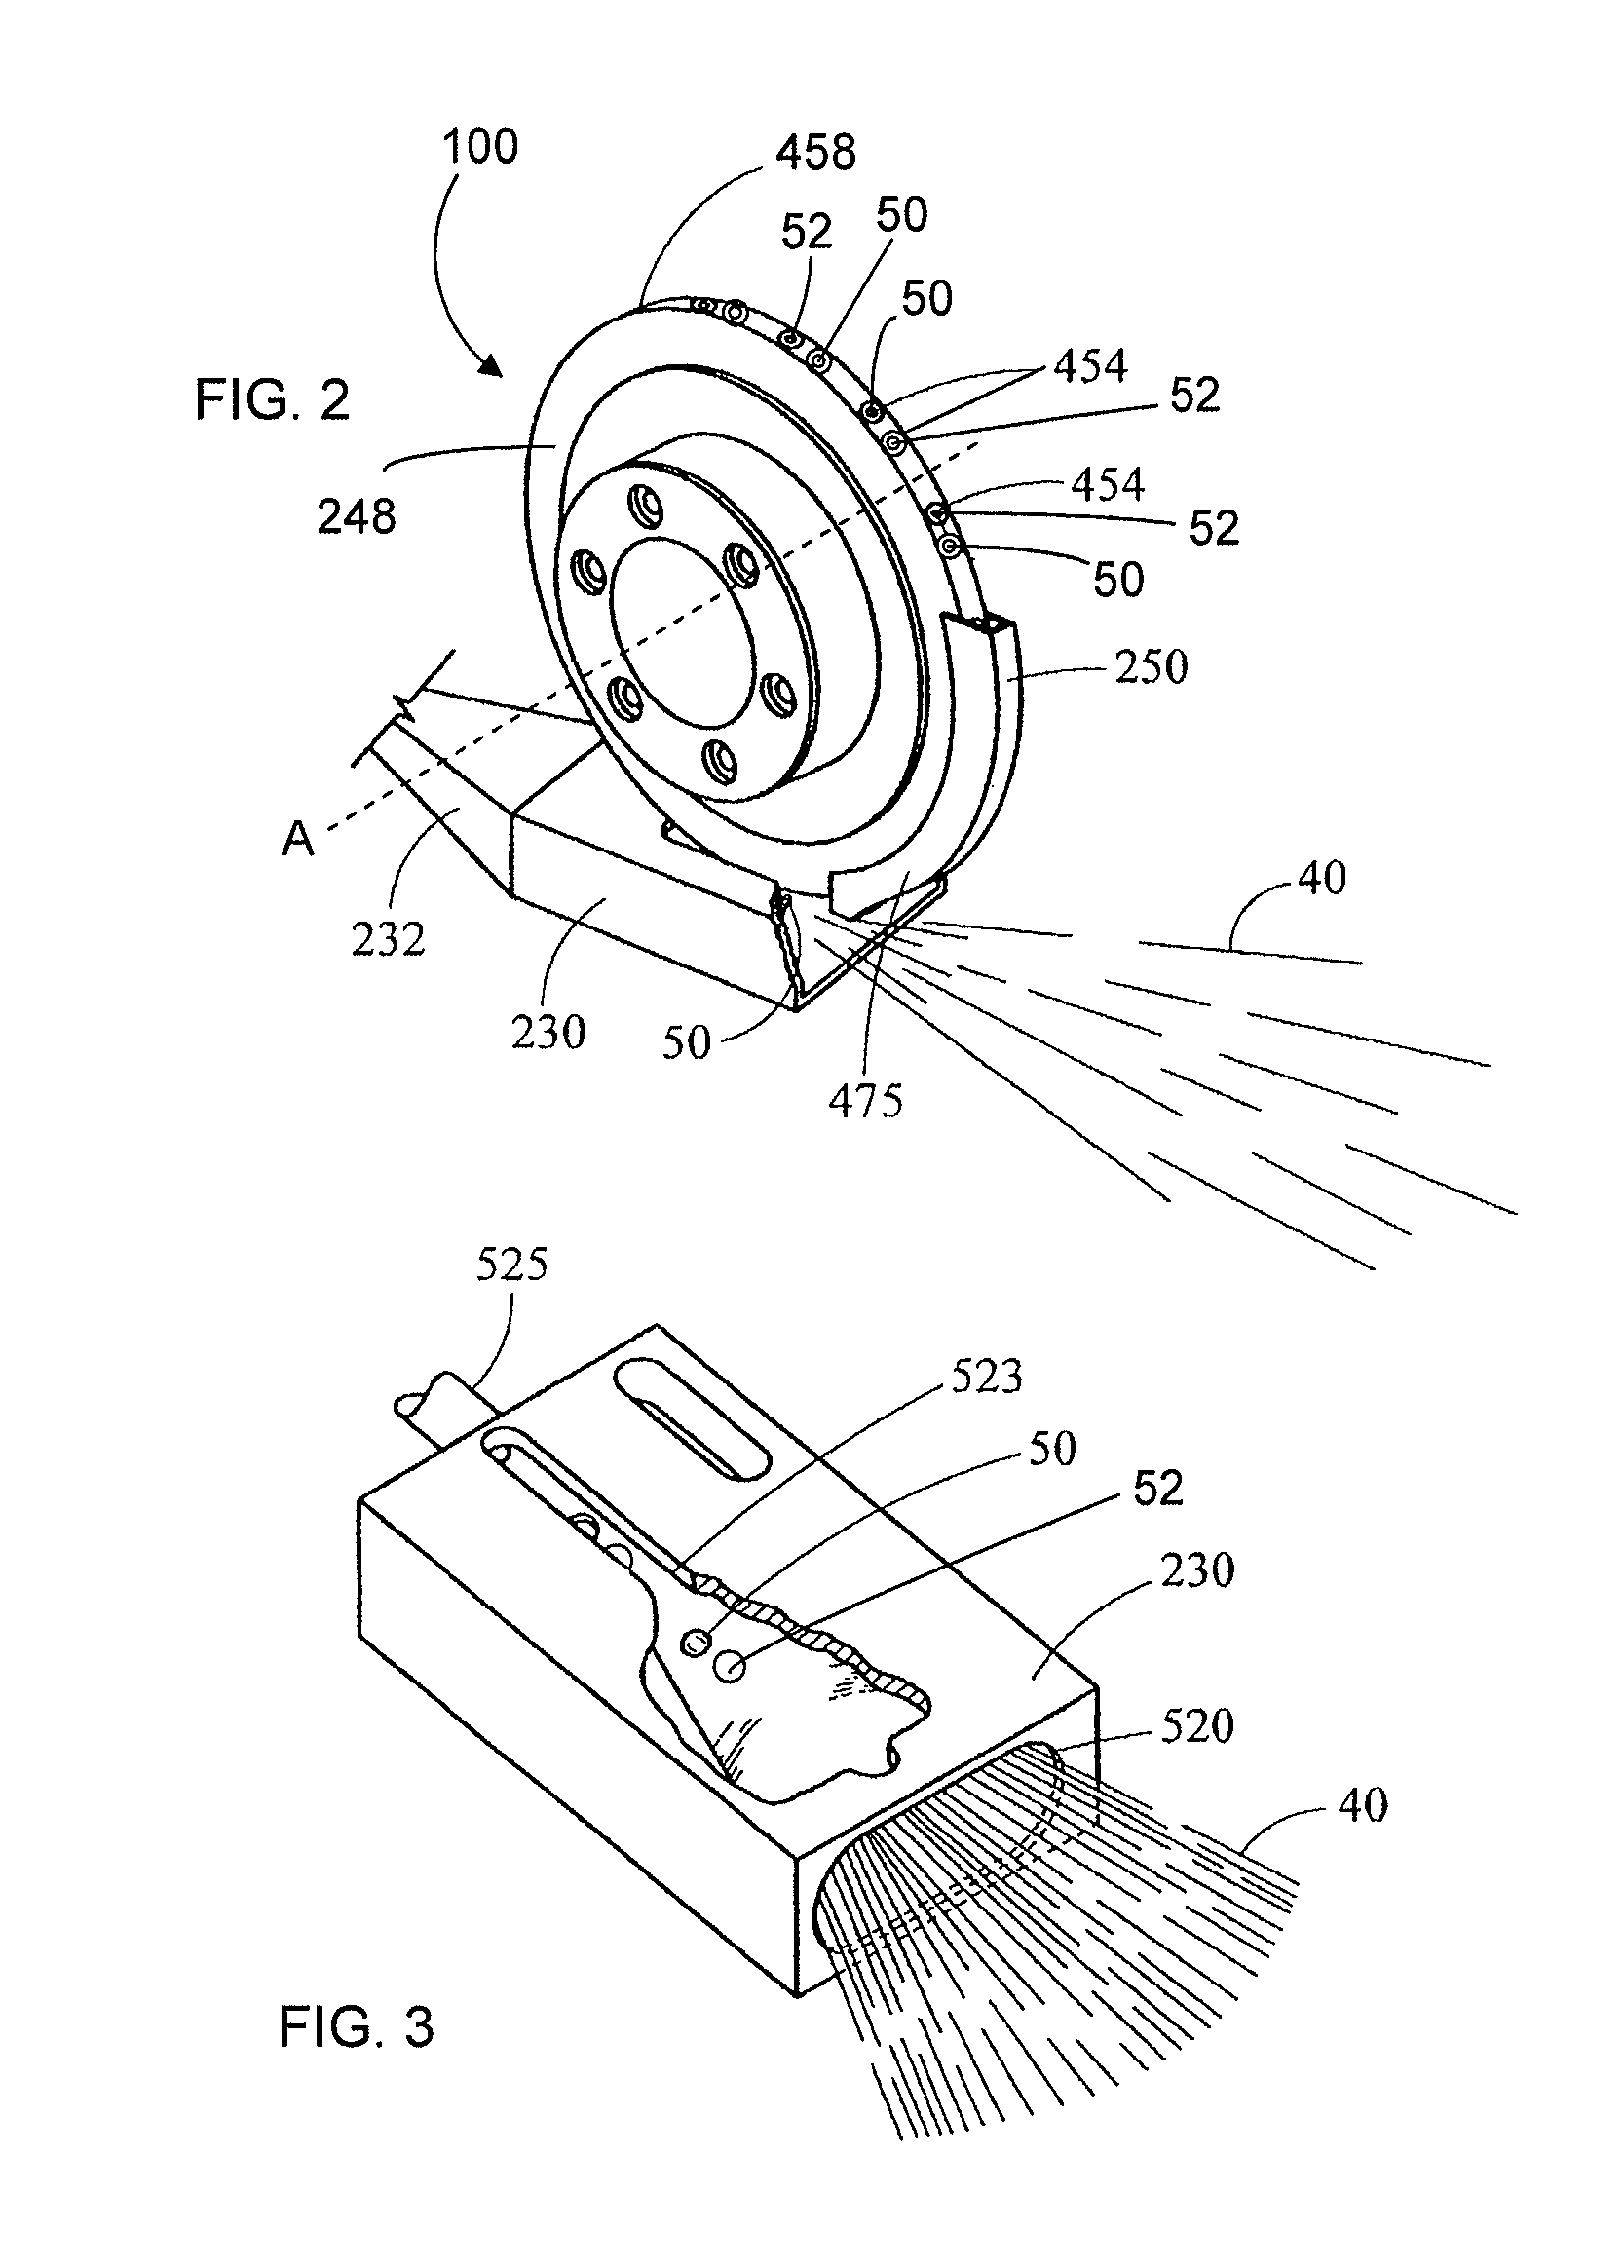 Apparatus for inserting objects into a filter component of a smoking article